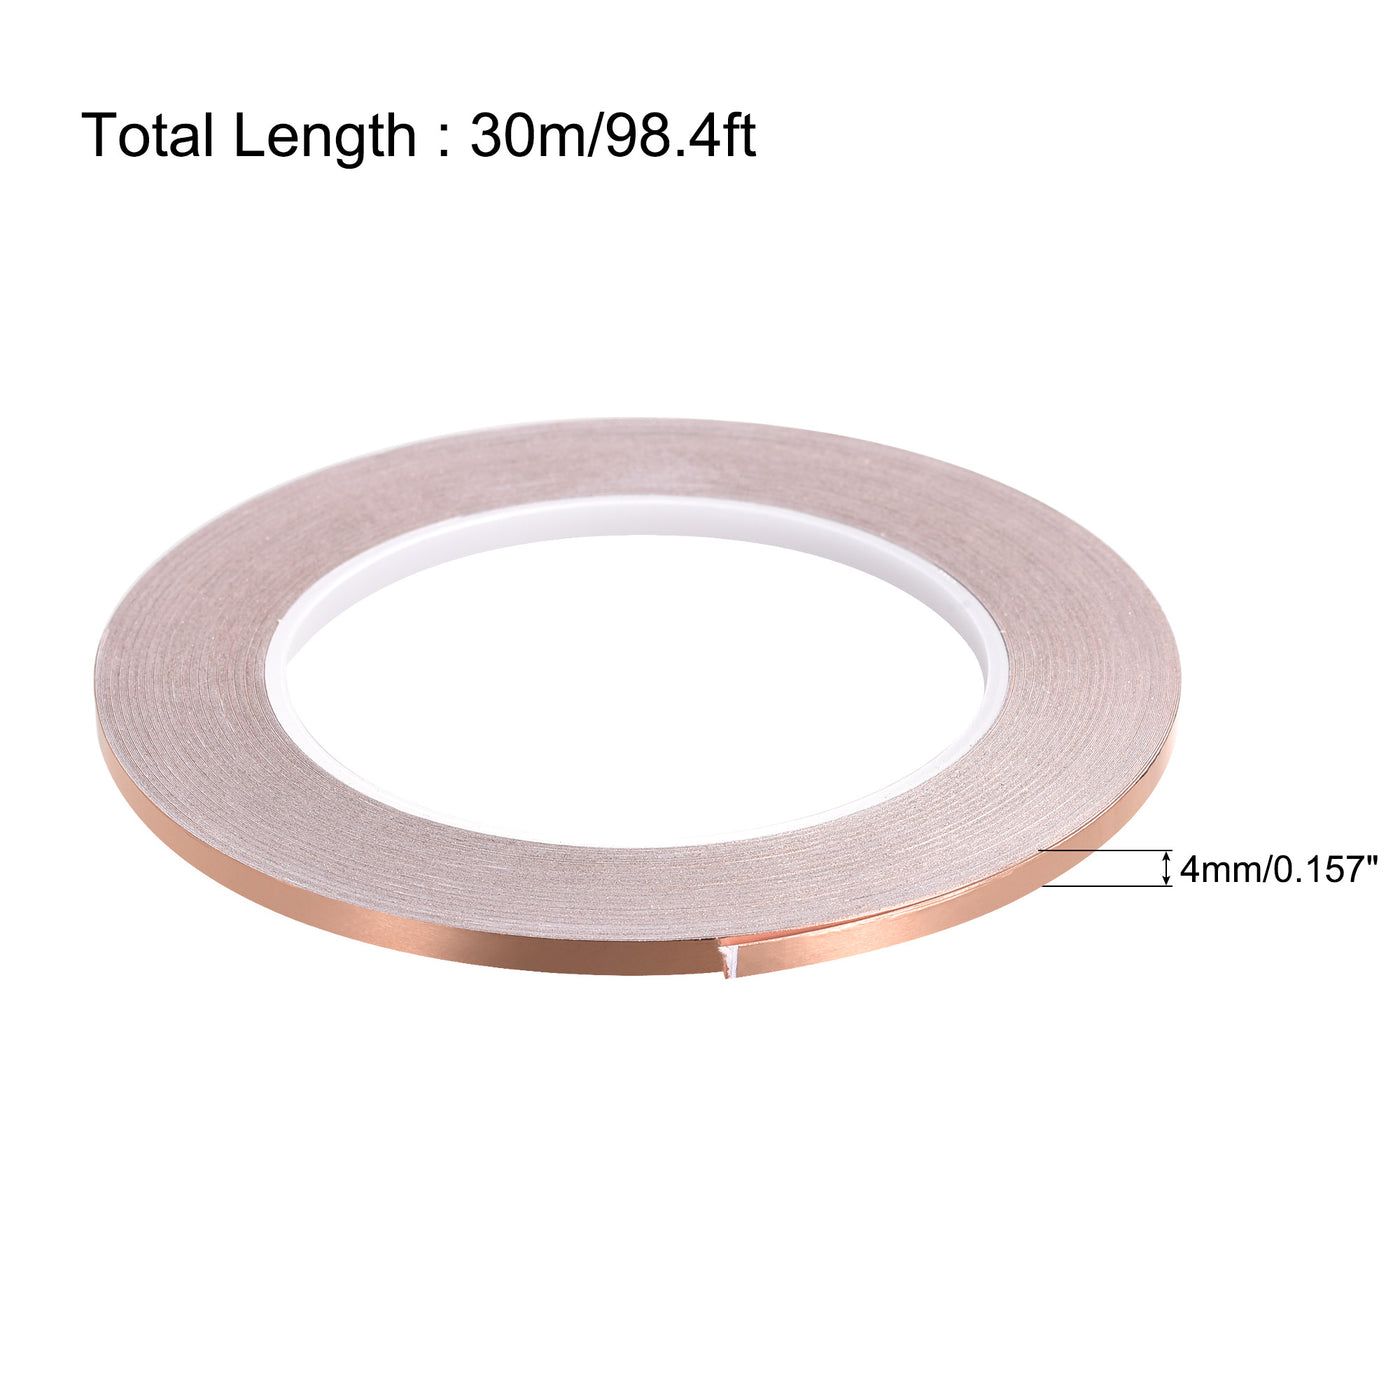 uxcell Uxcell Single-Sided Conductive Tape Copper Foil Tape 4mm x 30m/98.4ft